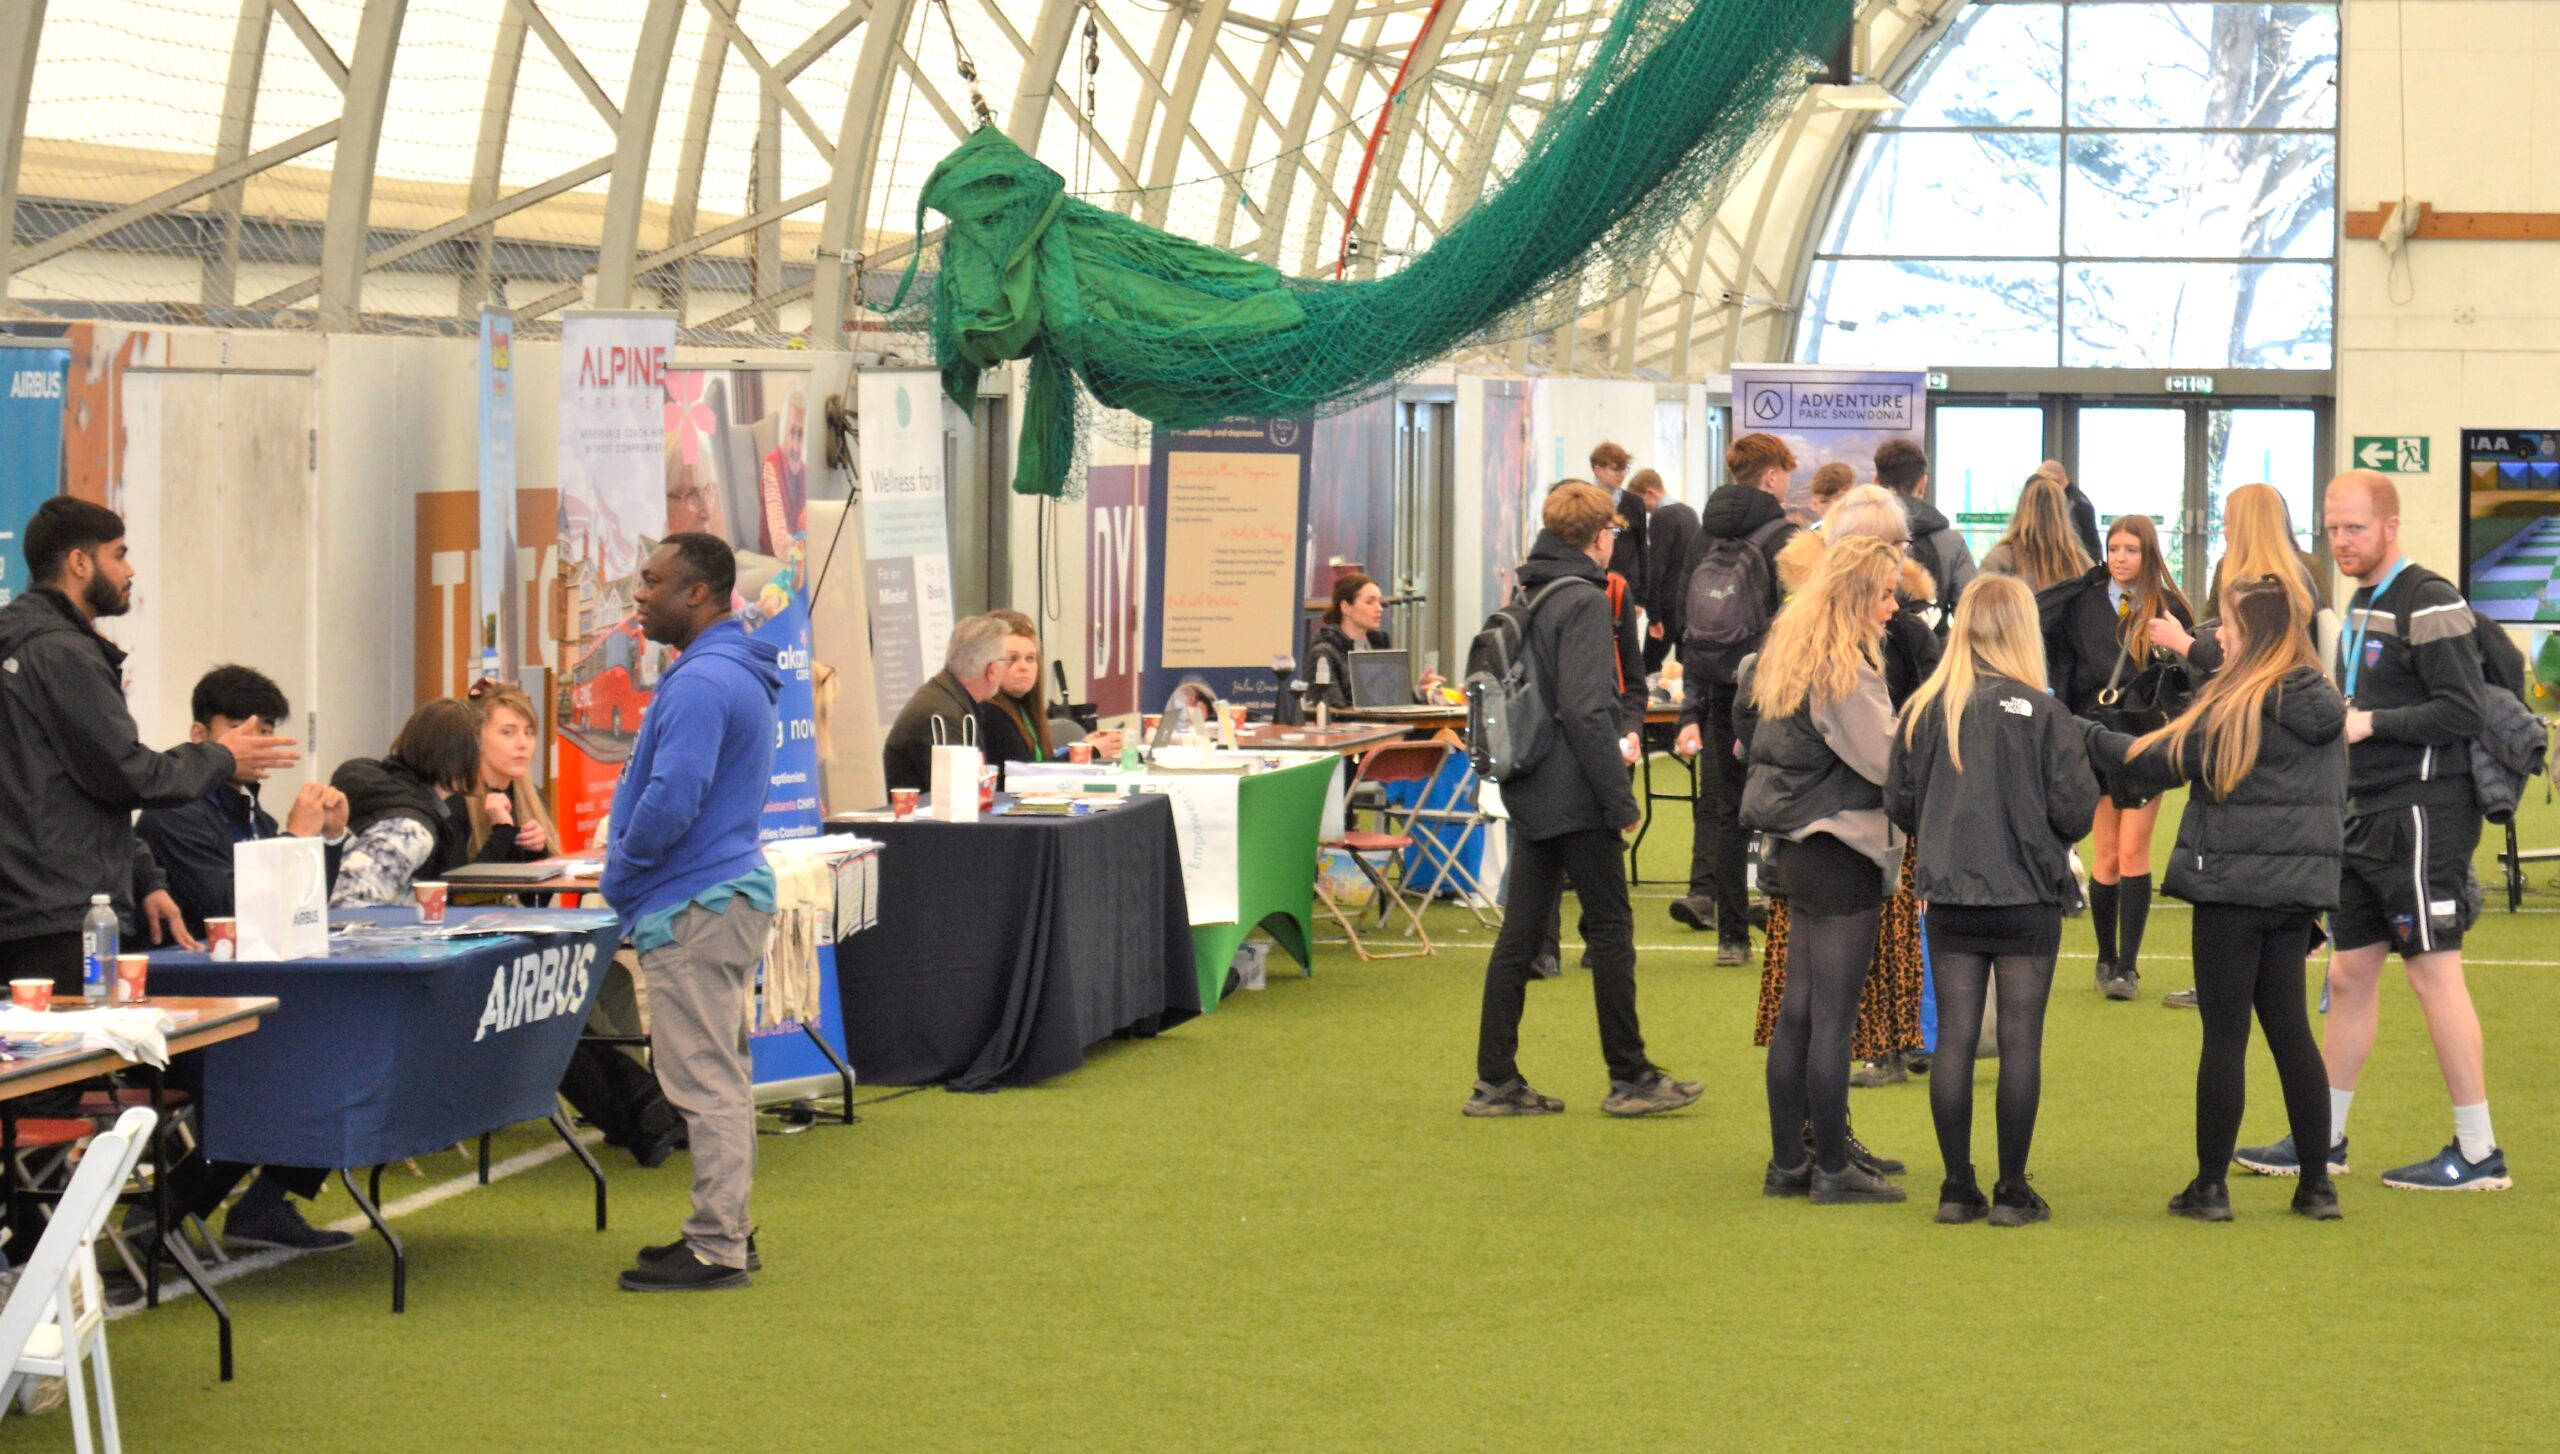 Jobs Expo returns bigger and better after 500 attended last year’s event